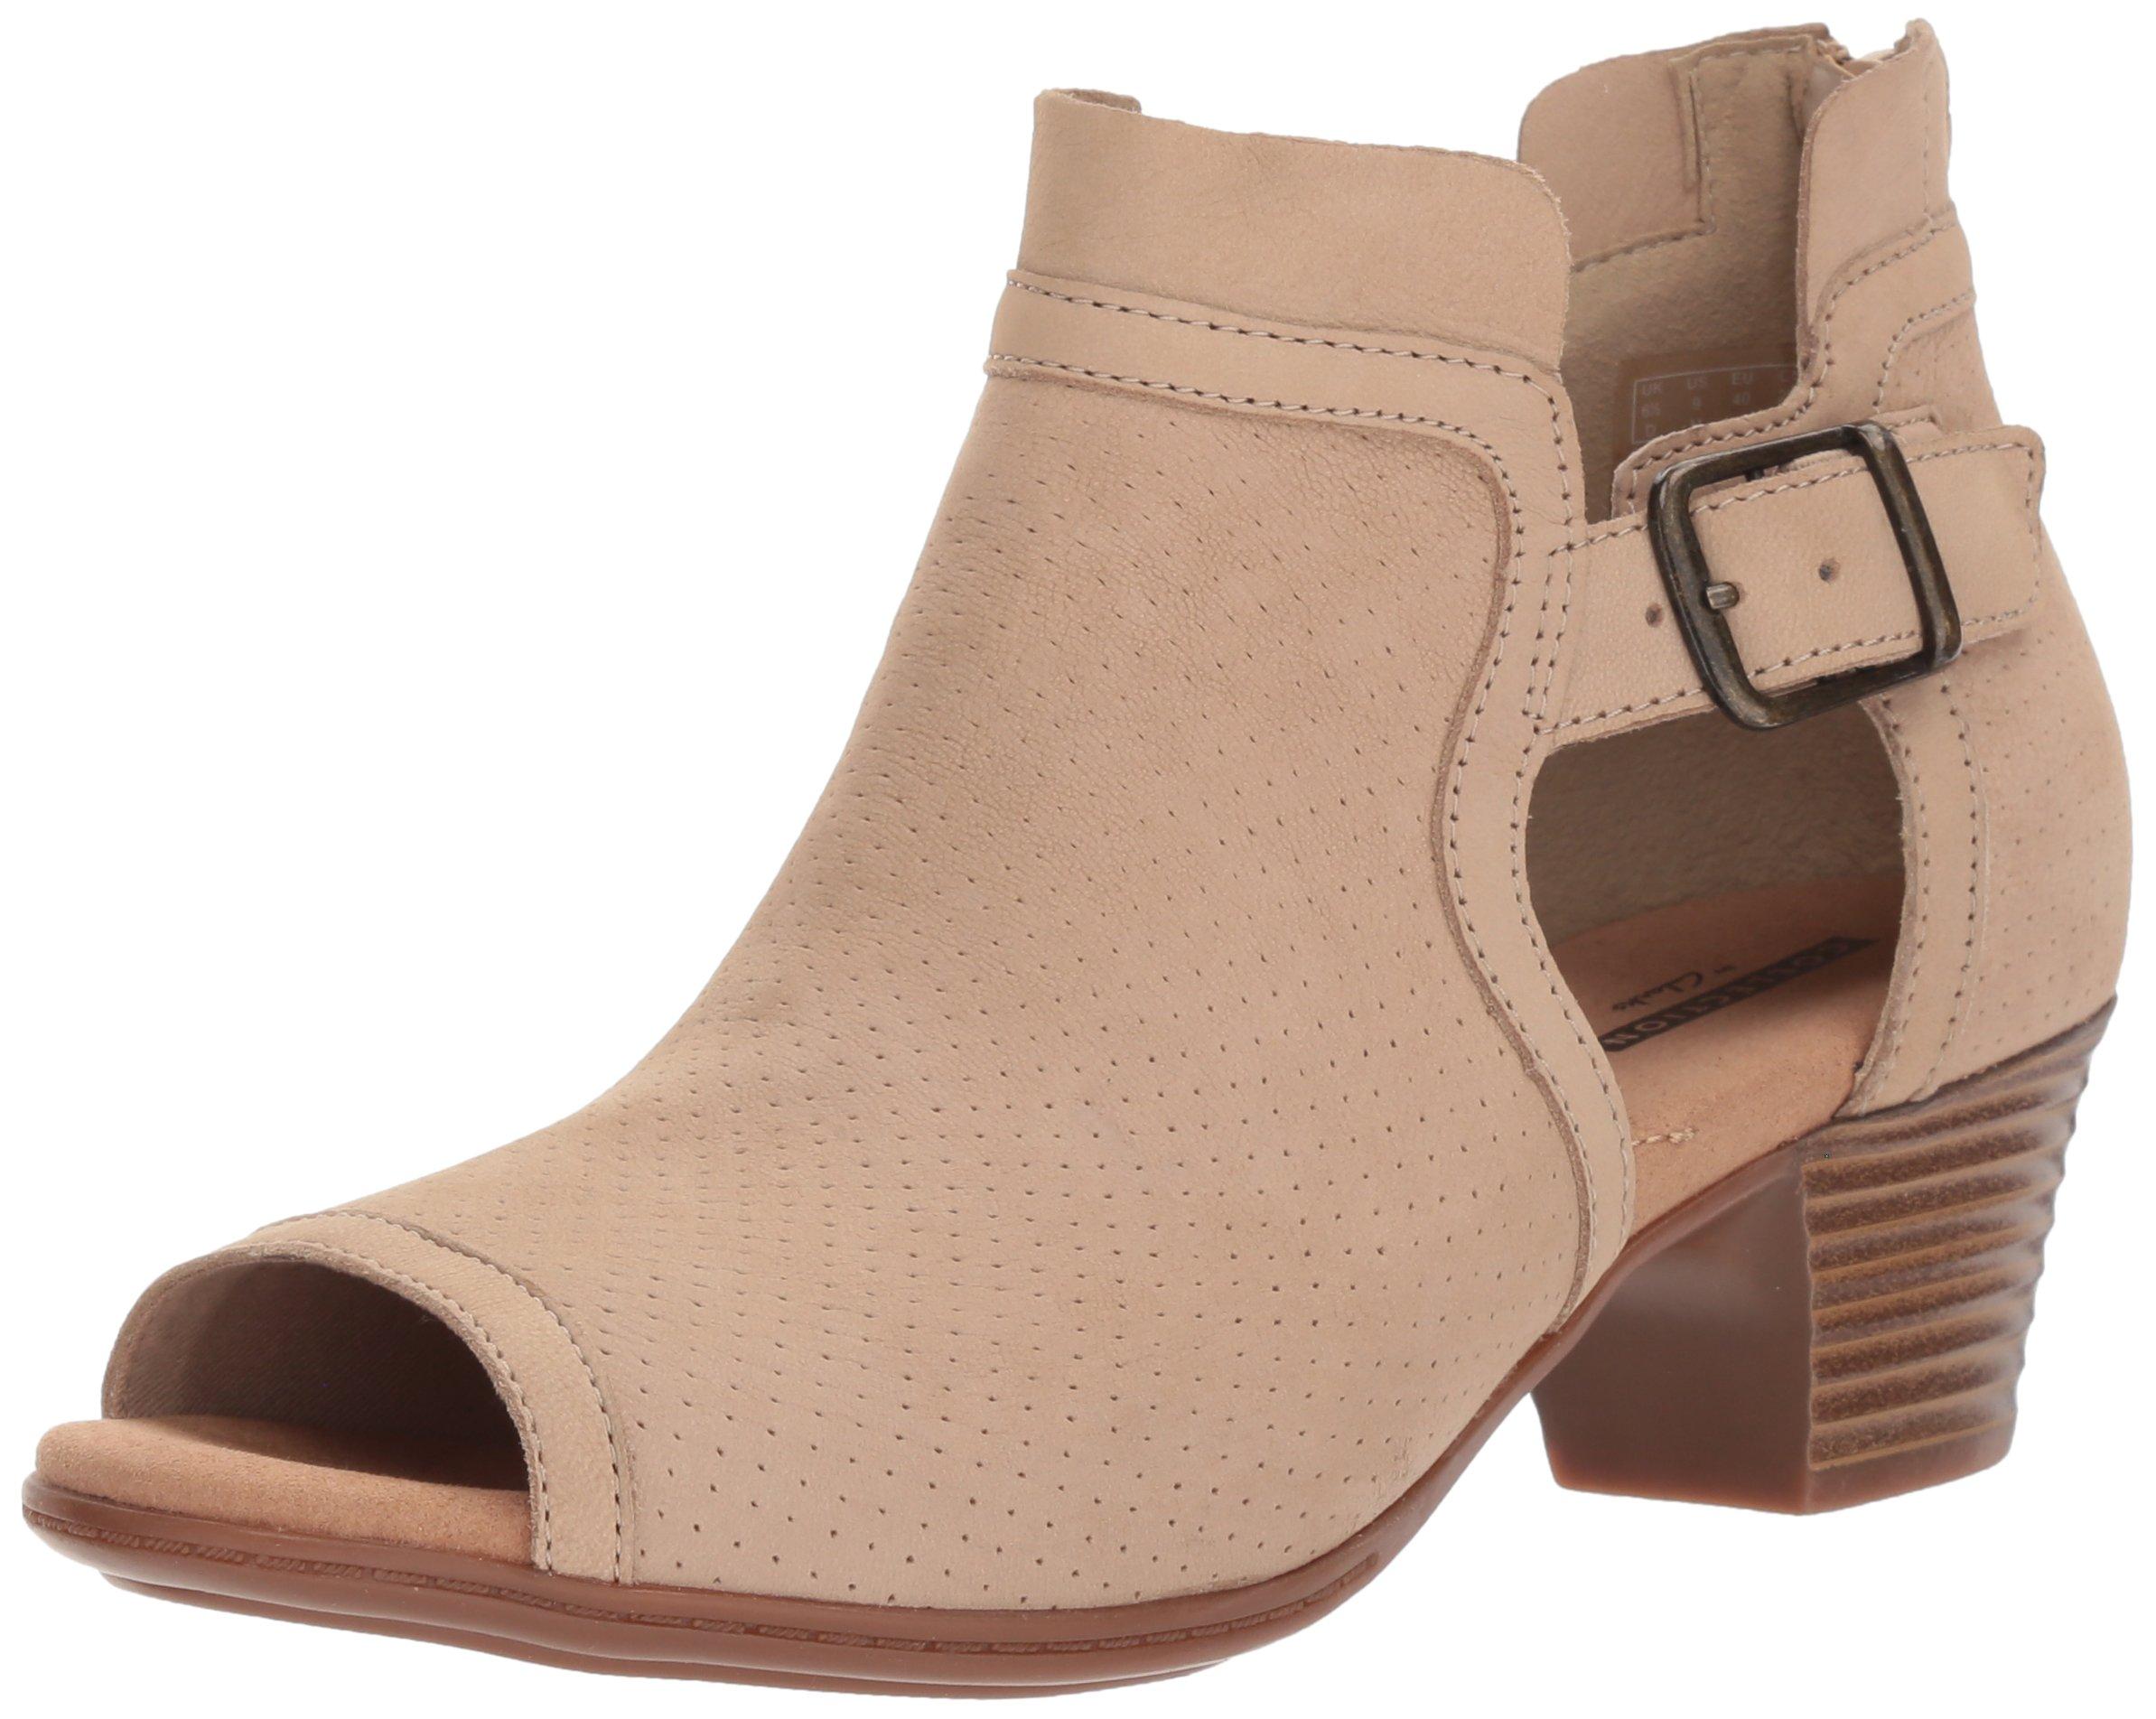 Clarks Valarie Kimble Heeled Sandal in Natural | Lyst